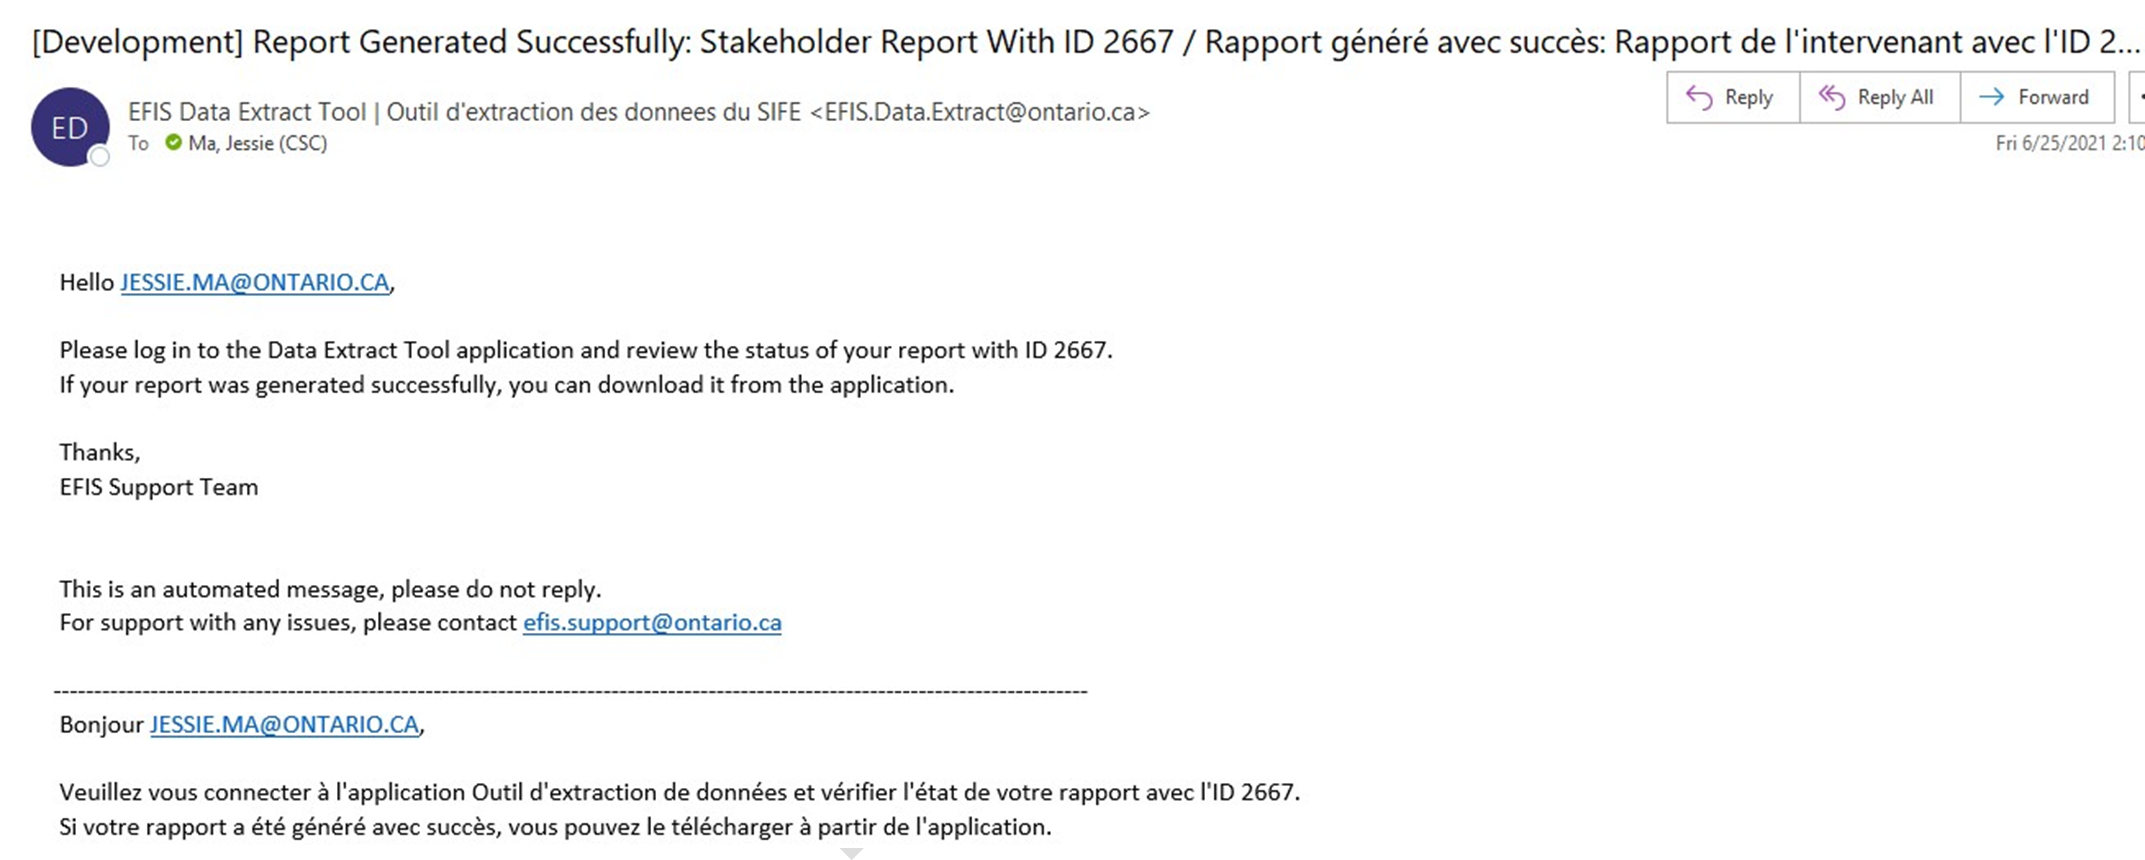 Stakeholder's Report Deployment Type